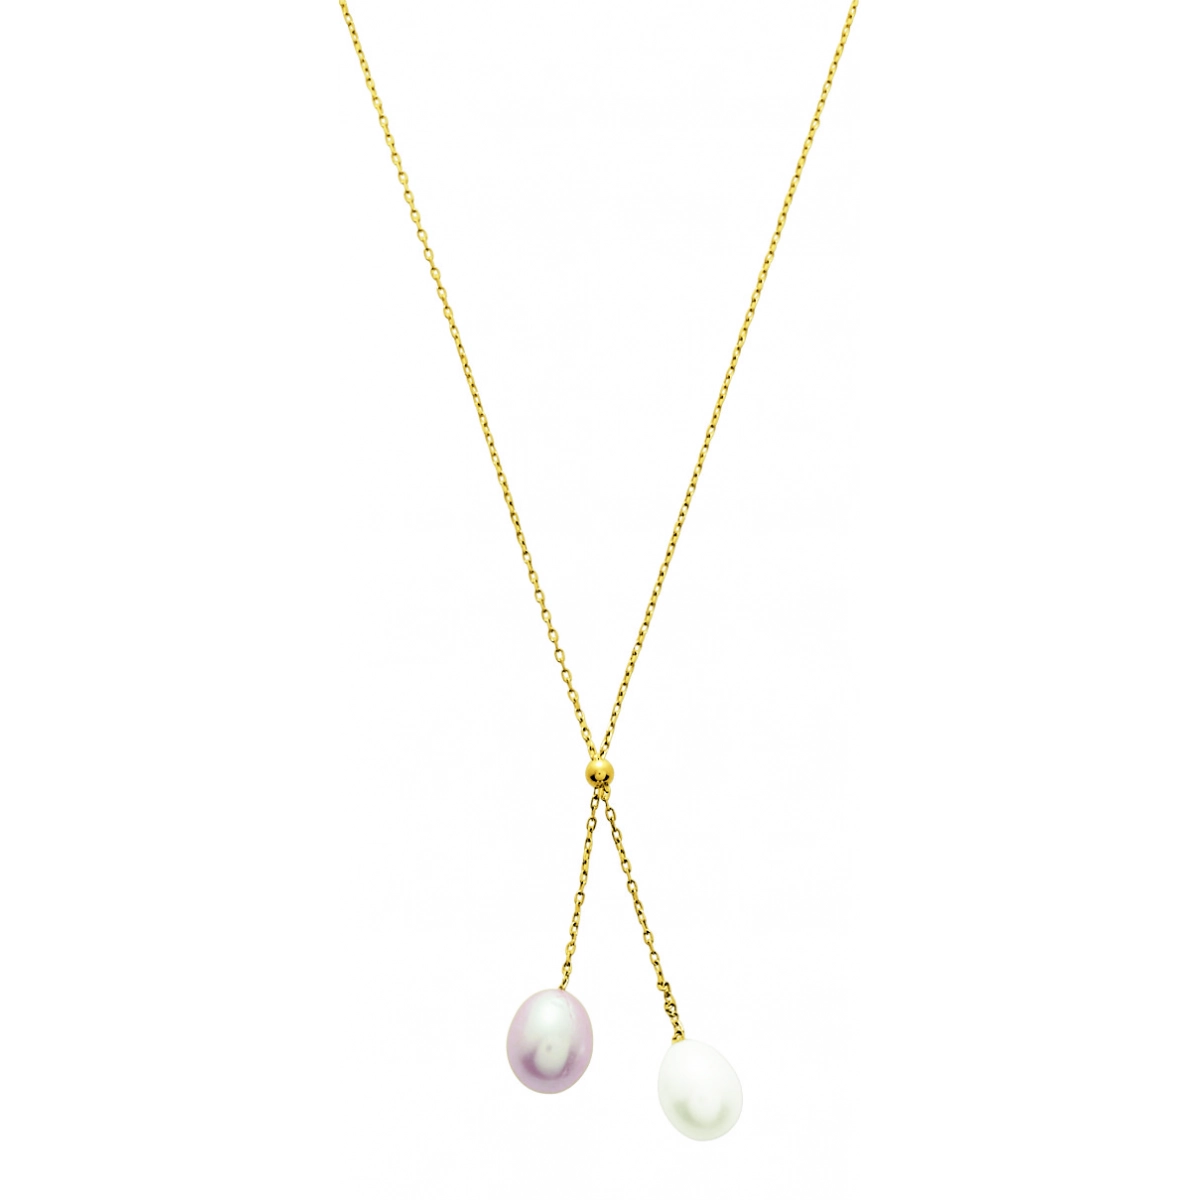 Necklace w. cult.FWpearl 18K YG - Size: 42  Lua Blanca  7506P.42